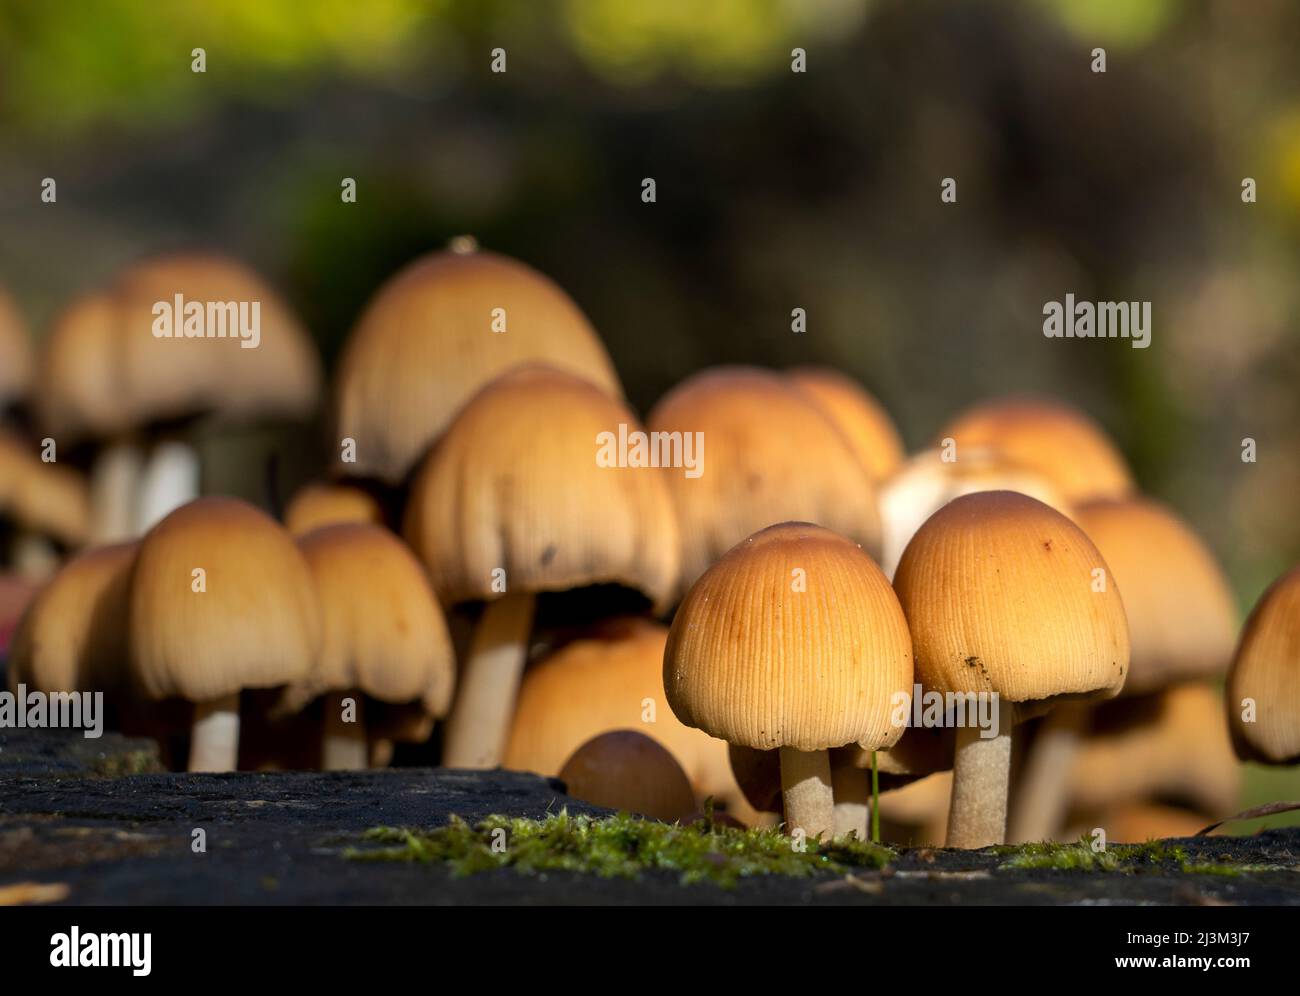 Cluster of small mushrooms growing on a surface; Bolam, Northumberland, England Stock Photo